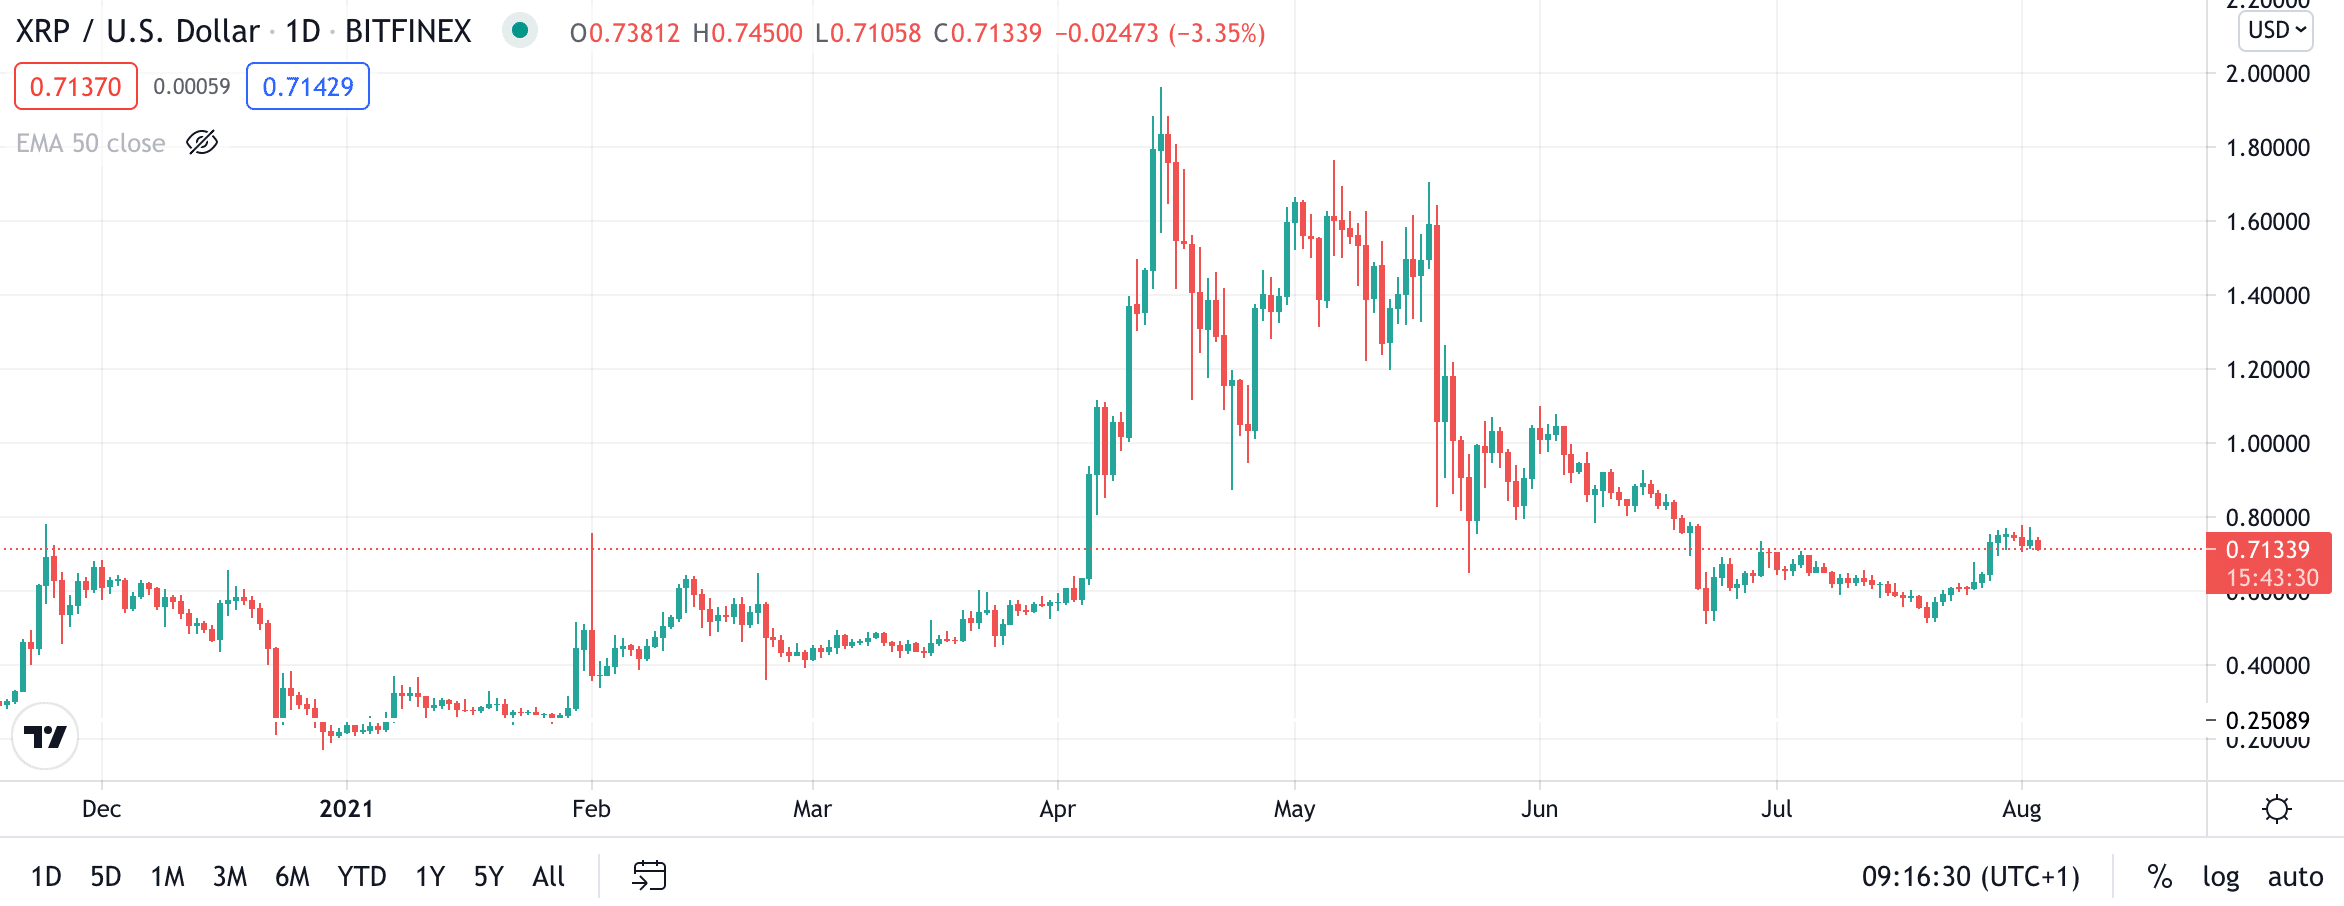 xrp price chart - xrp long term forecast